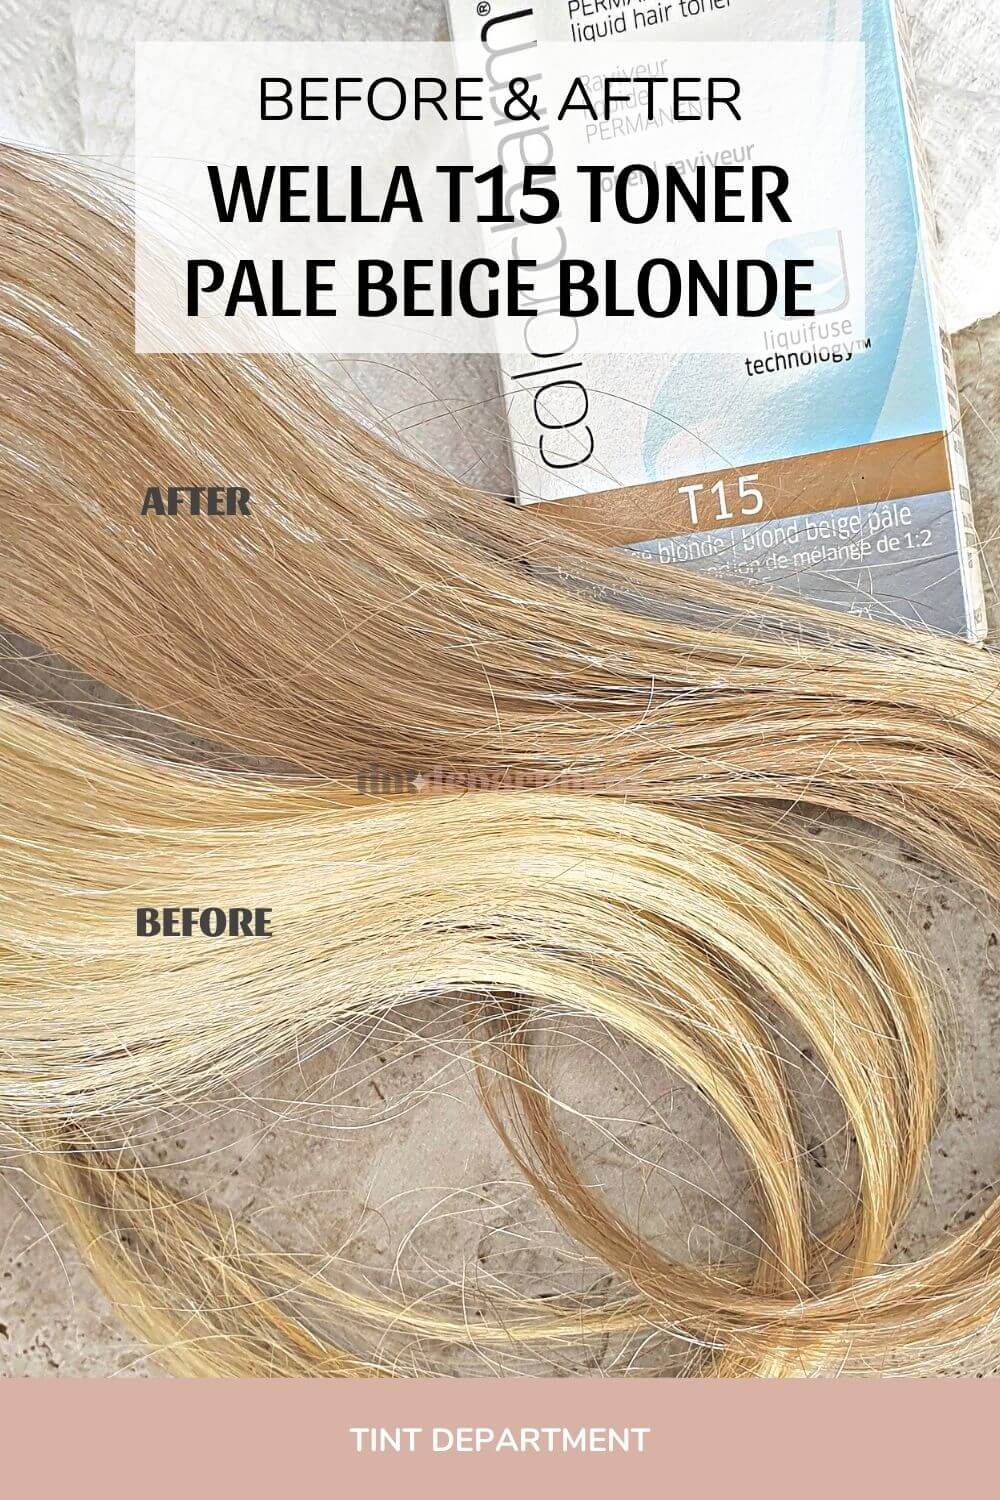 Wella T15 Toner Australia Before and After on Bleached Hair